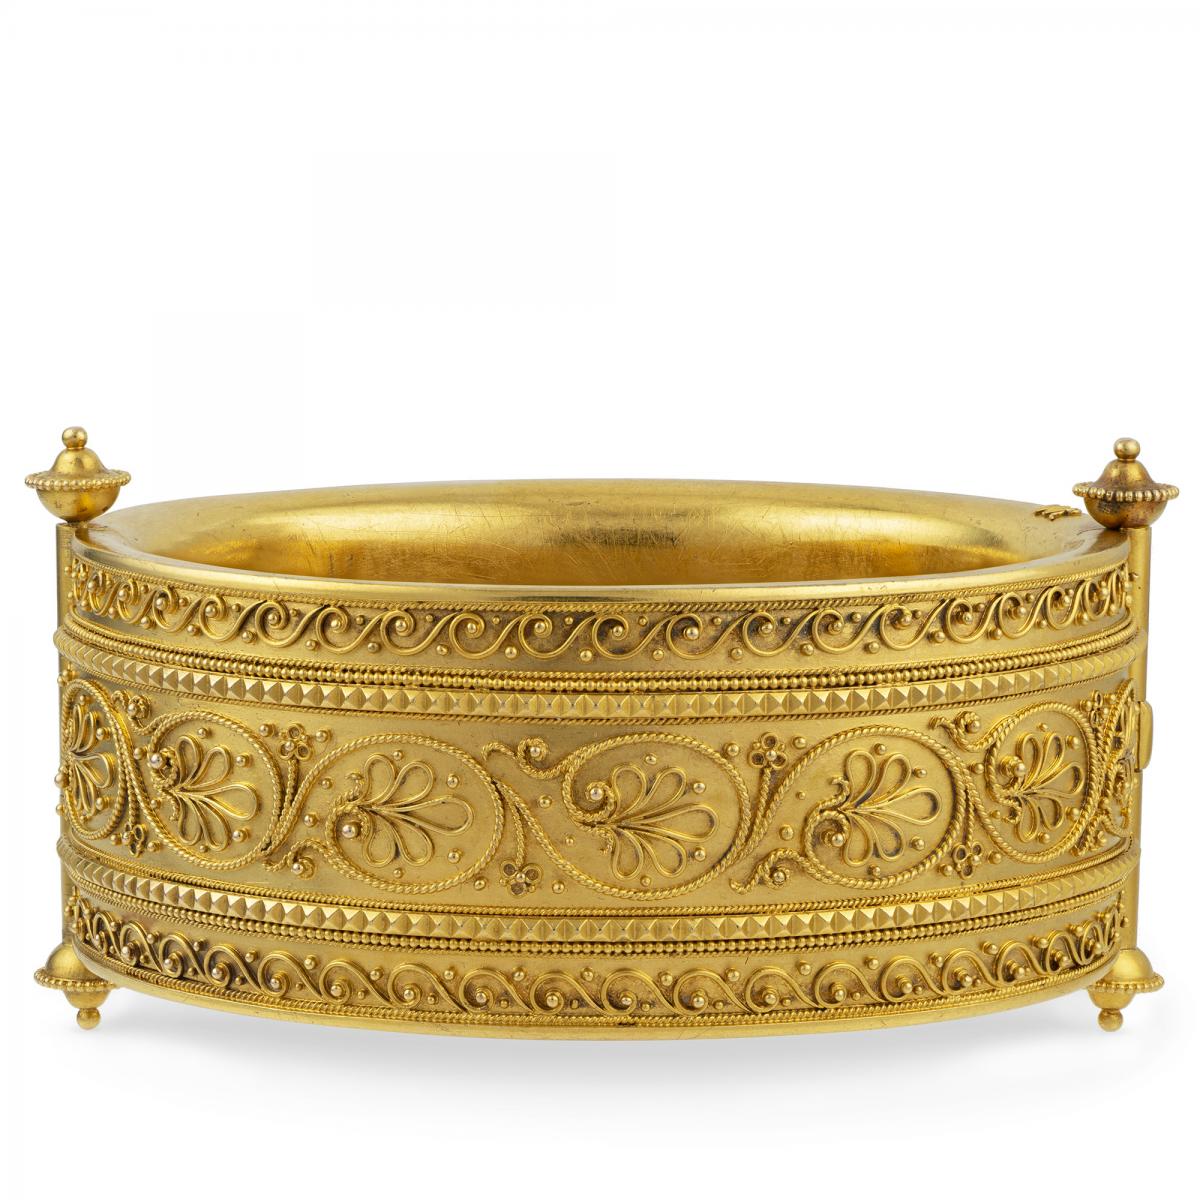 A Wide Archaeological Revival Gold Bangle, with Etruscan-Style Wirework Decoration, Circa 1870